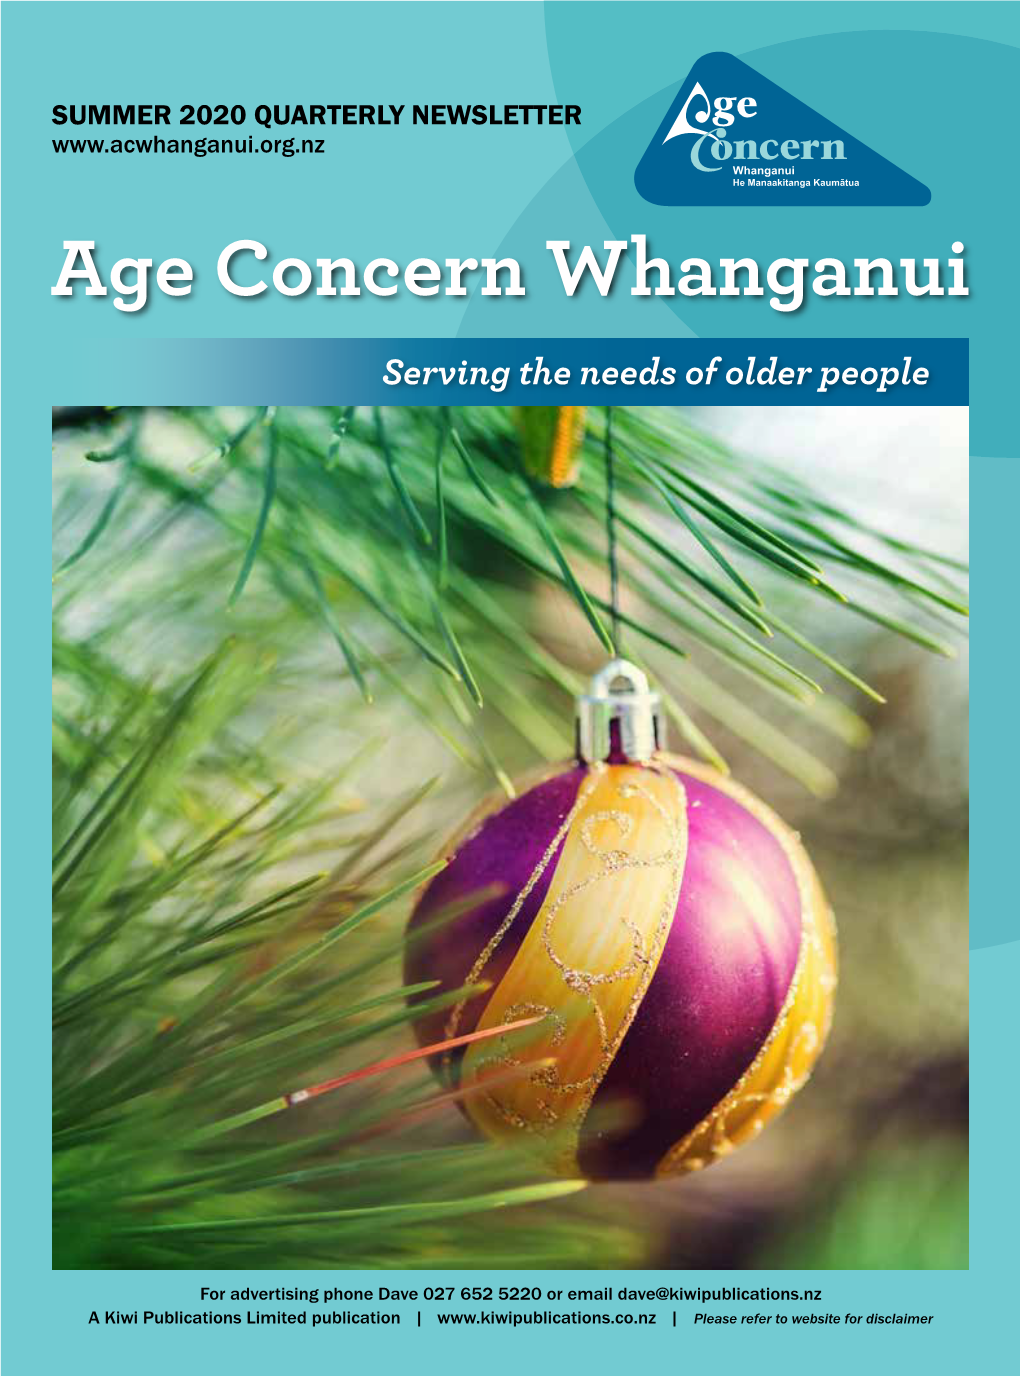 Age Concern Whanganui Issue 4 2020 Summer